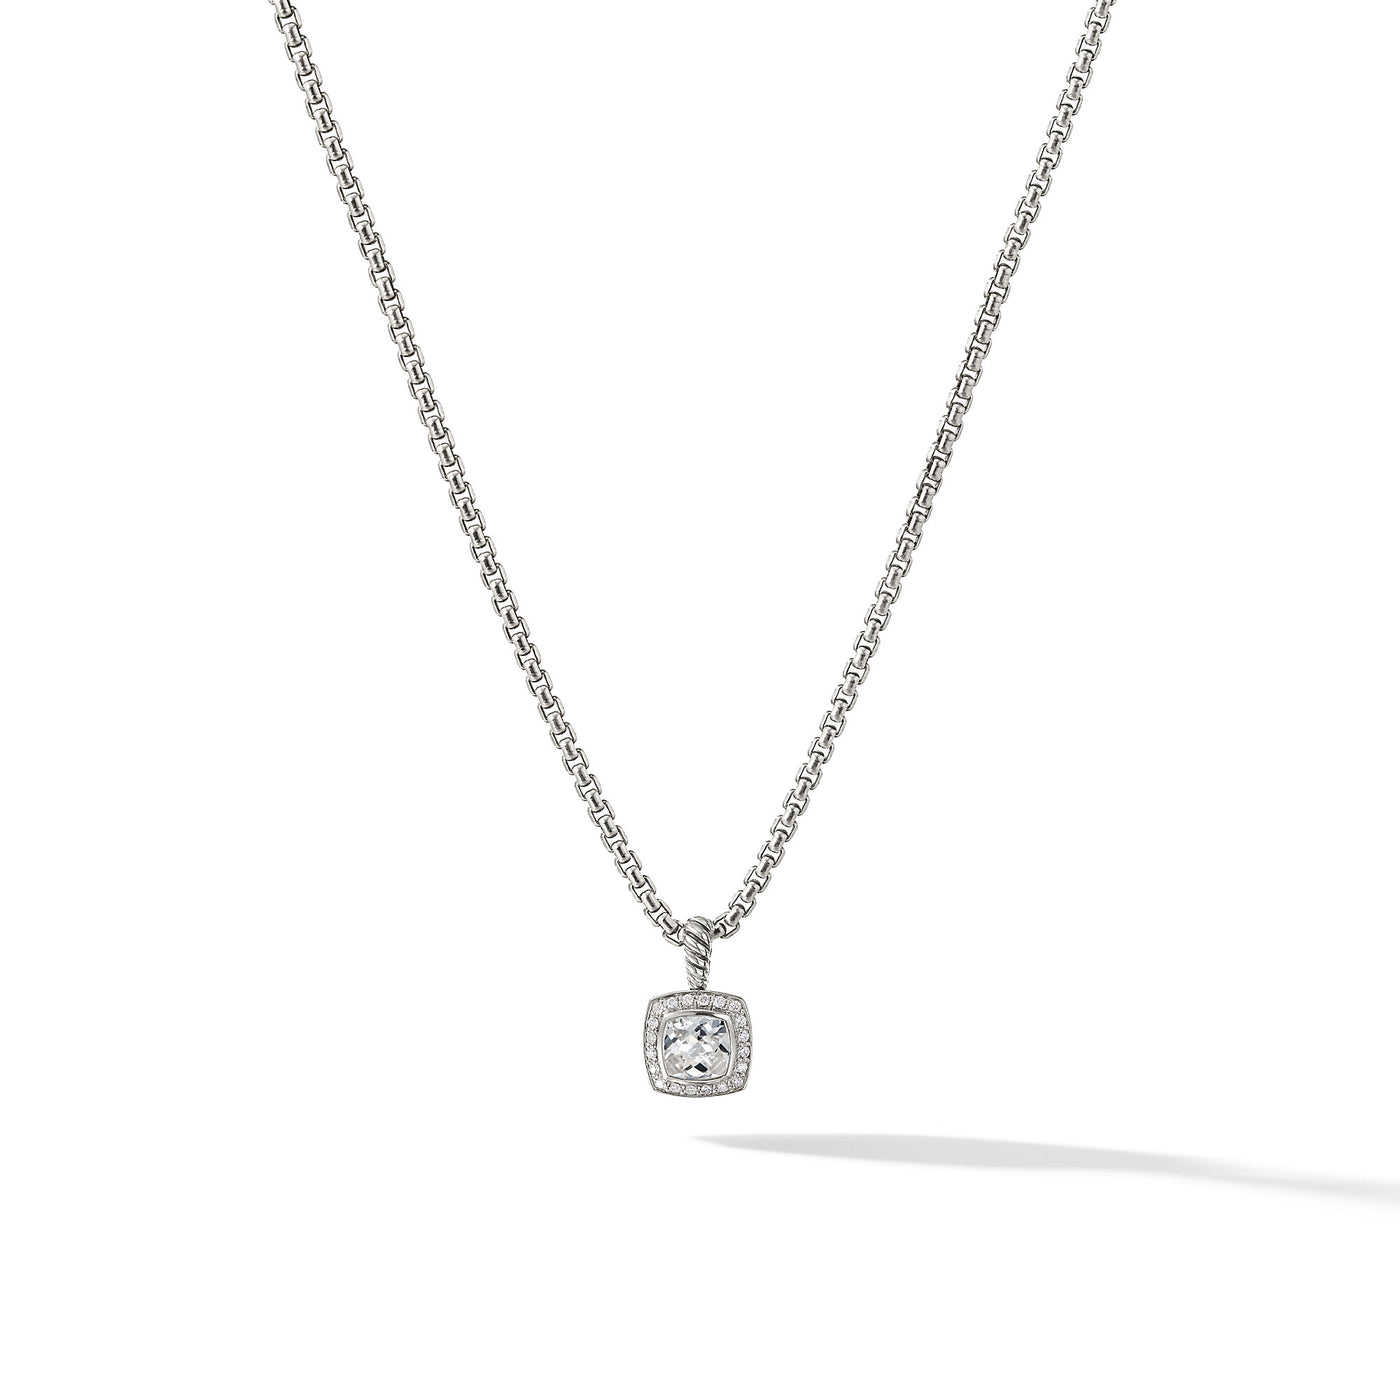 Petite Albion® Pendant Necklace in Sterling Silver with White Topaz and Diamonds\, 7mm